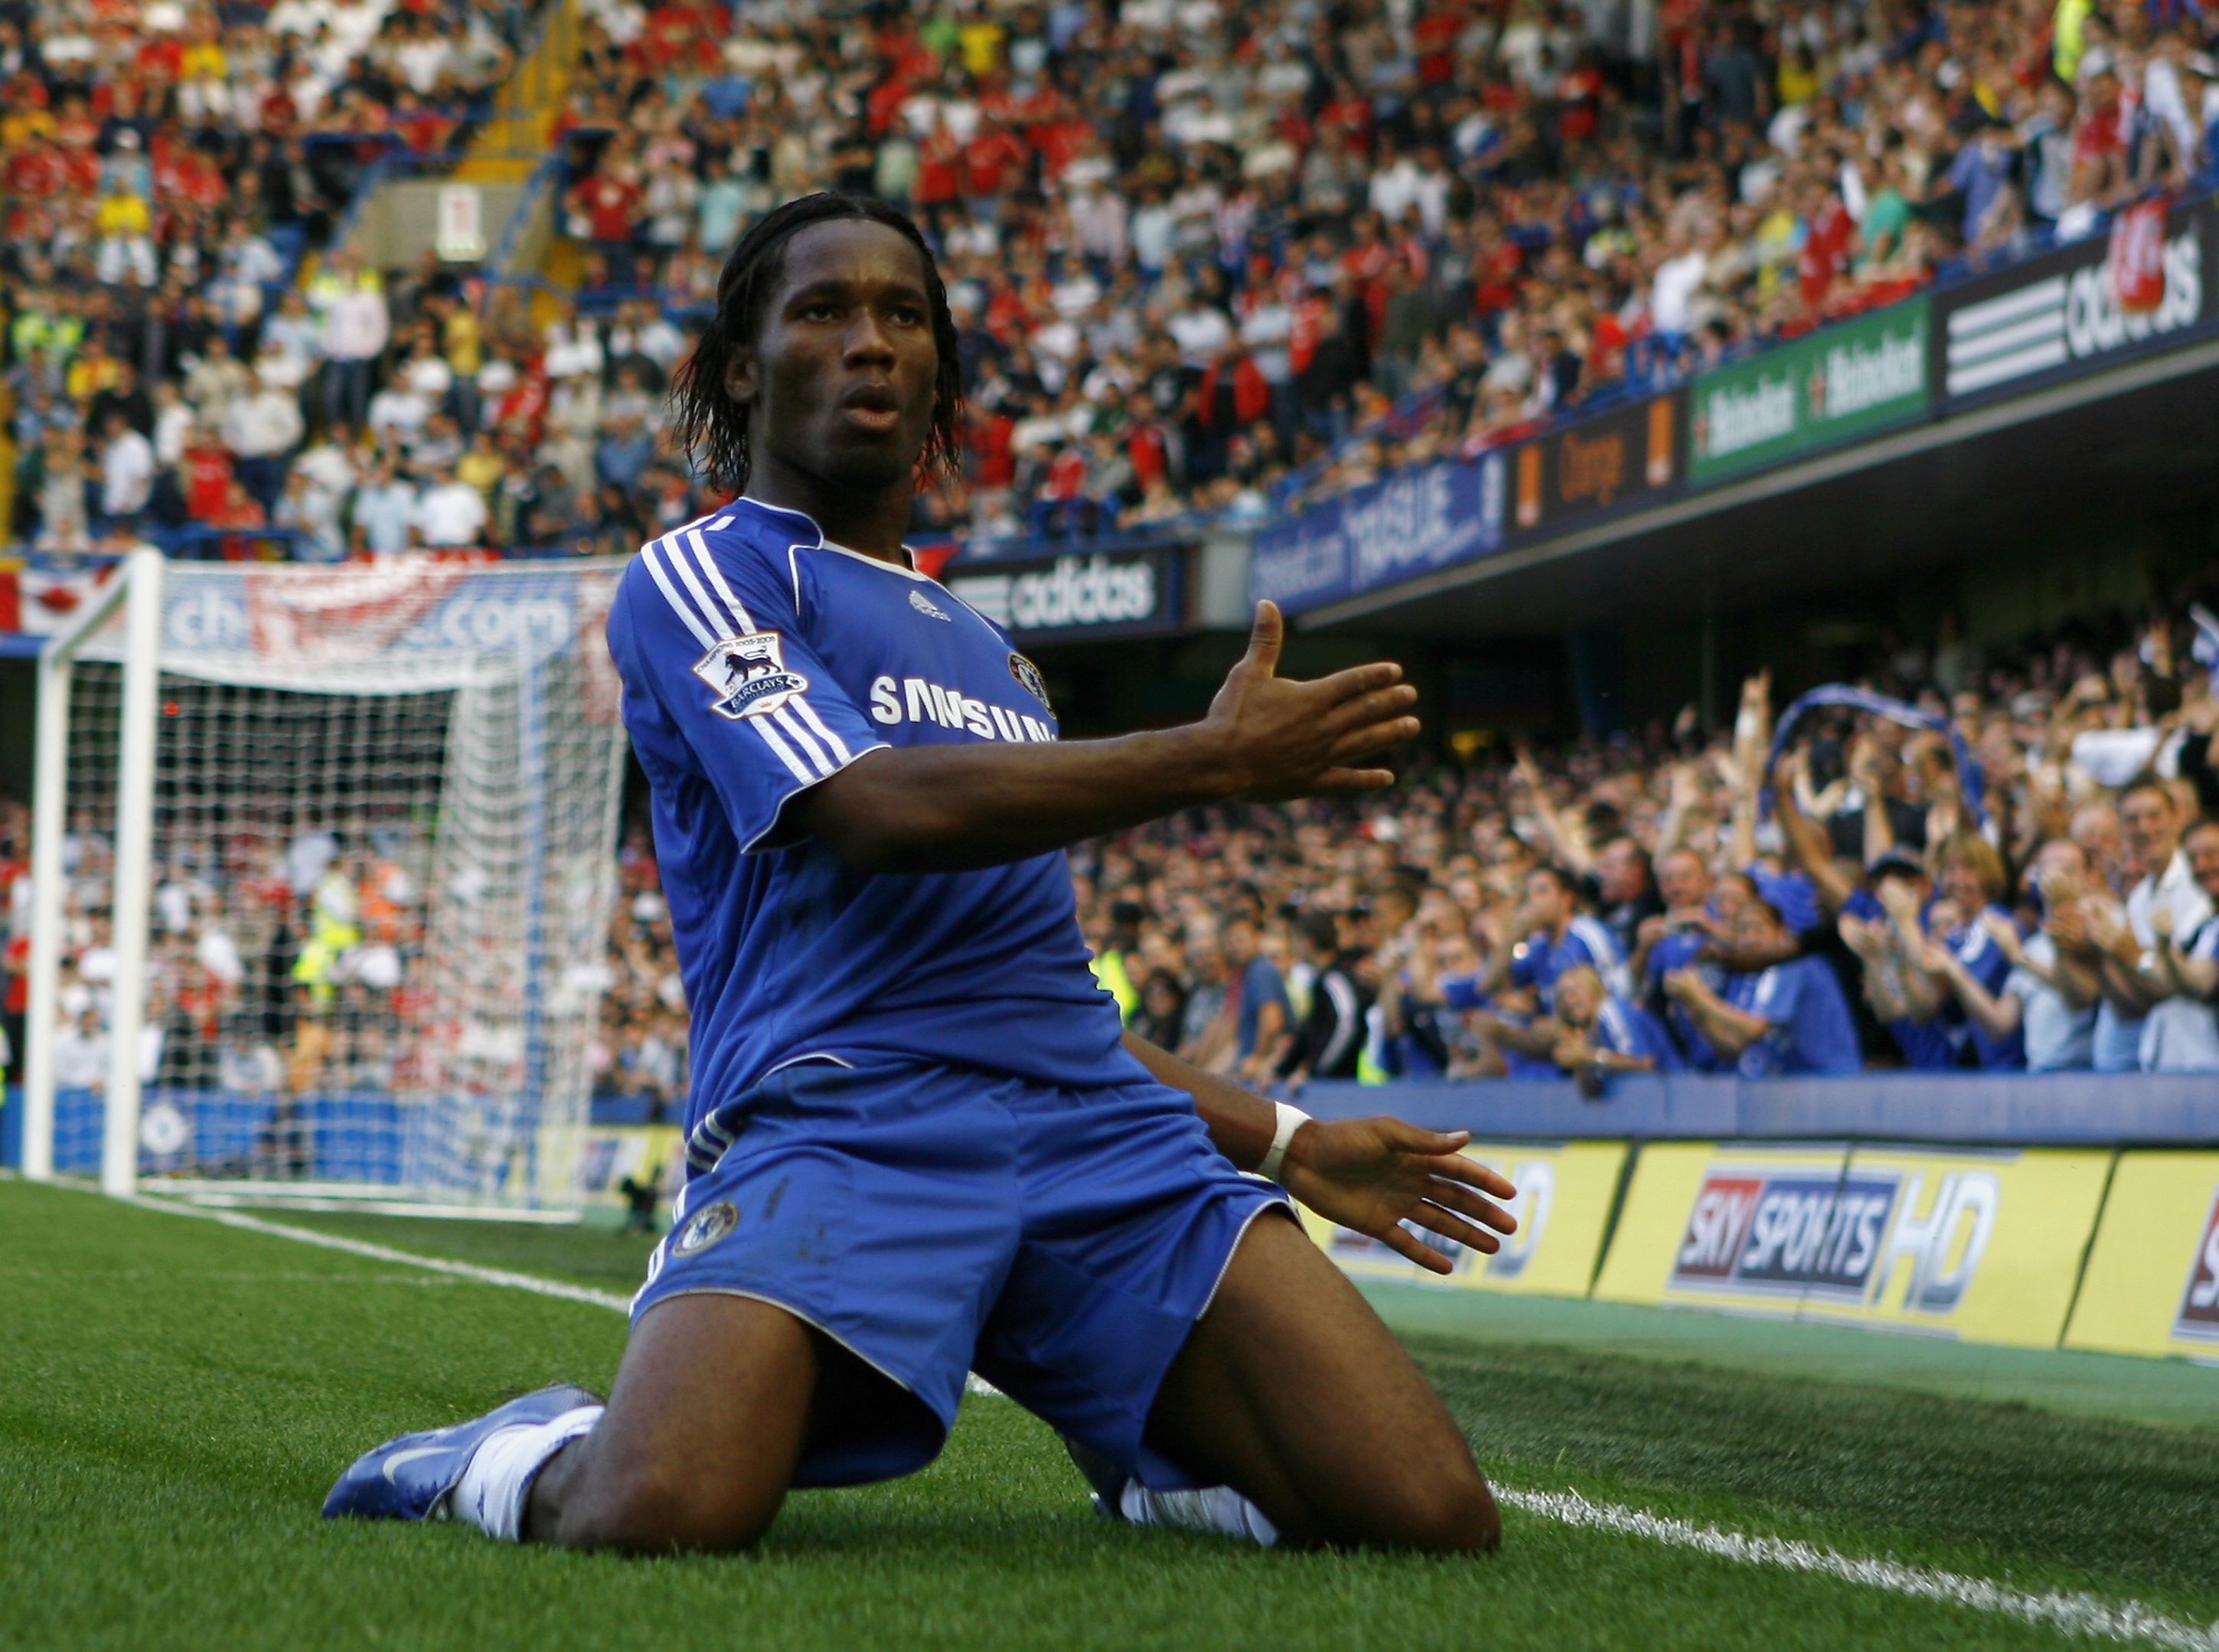 LONDON - SEPTEMBER 17:  Didier Drogba of Chelsea celebrates as he scores the first goal during the Barclays Premiership match between Chelsea and Liverpool at Stamford Bridge on September 17, 2006 in London, England.  (Photo by Shaun Botterill/Getty Image